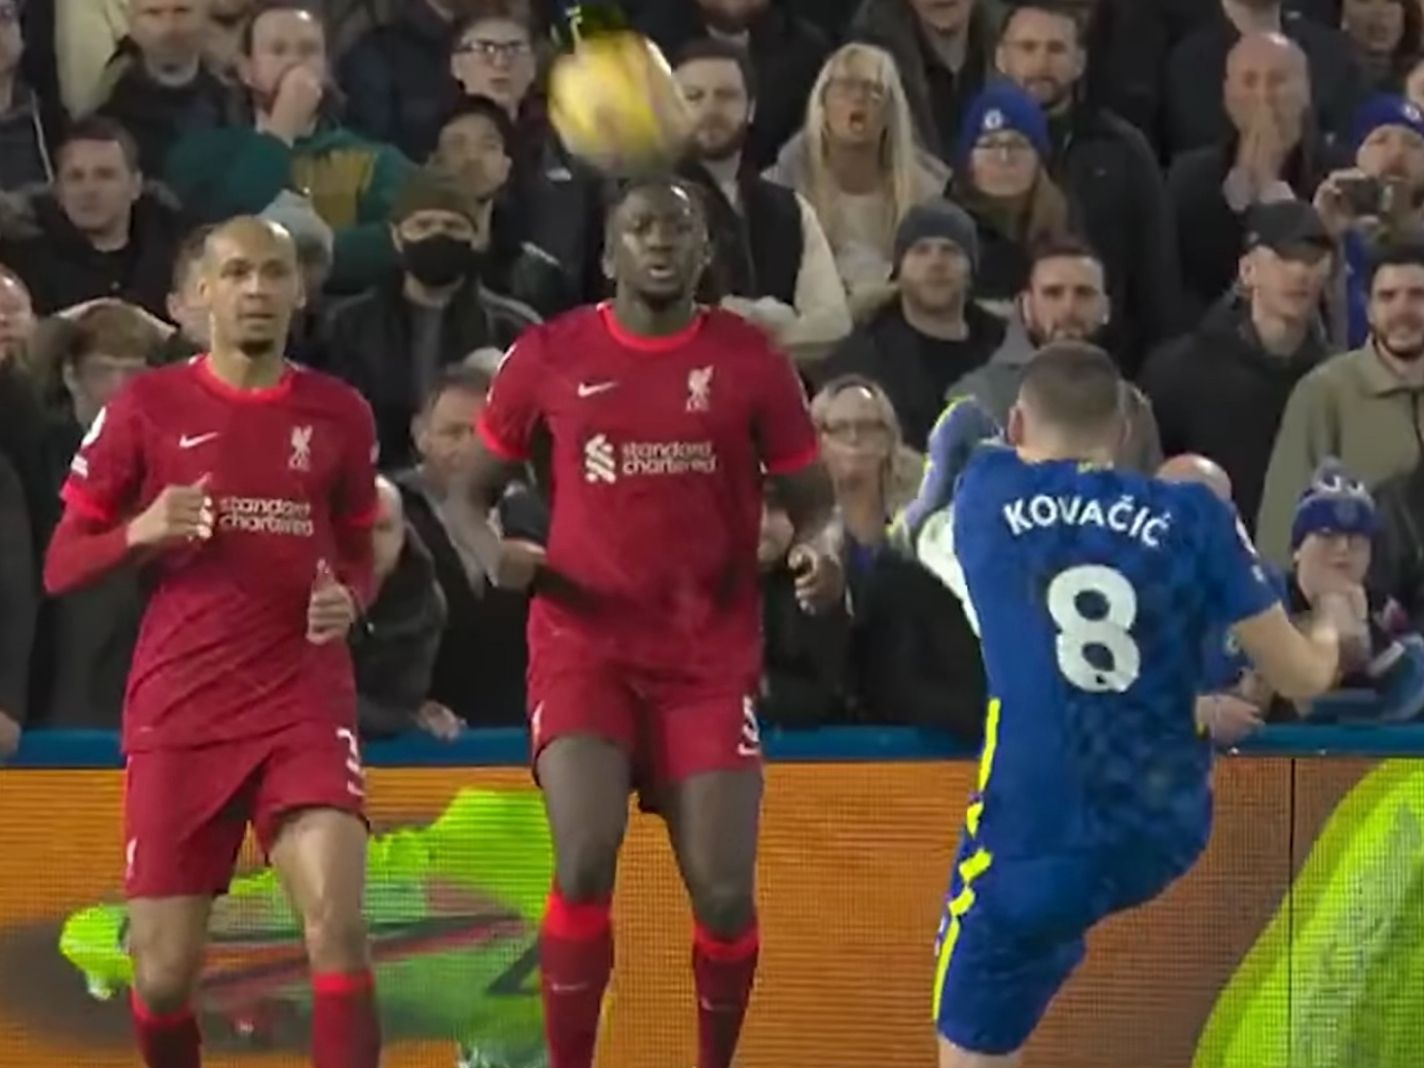 Mateo Kovacic in his stride as Fabinho and Konate look on